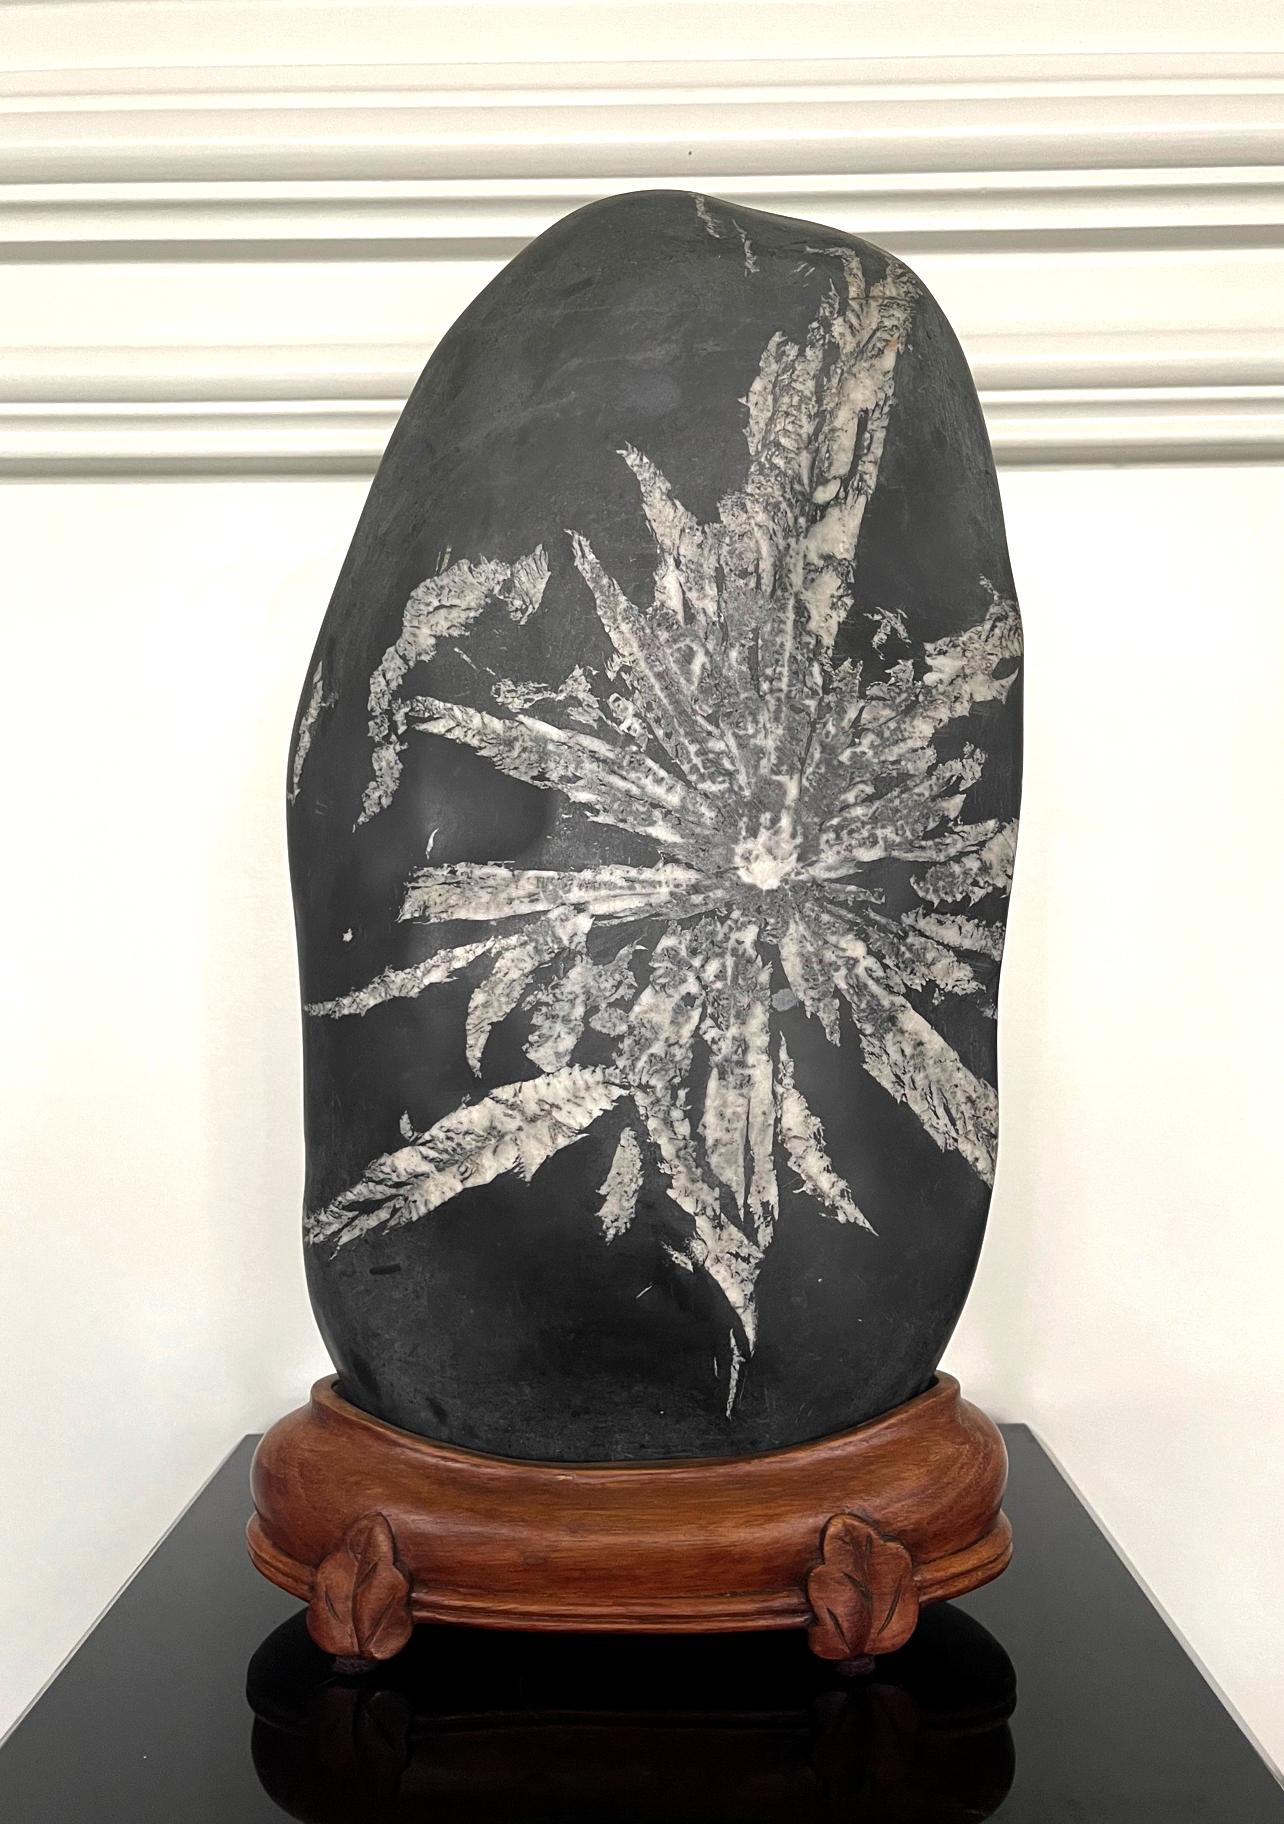 An extraordinary specimen created by nature millions of years ago, this large and stunning Chinese black chrysanthemum stone features white crystalline mineral (calcite and chalcedony) formation. The black Andulusite body contrasts dramatically with